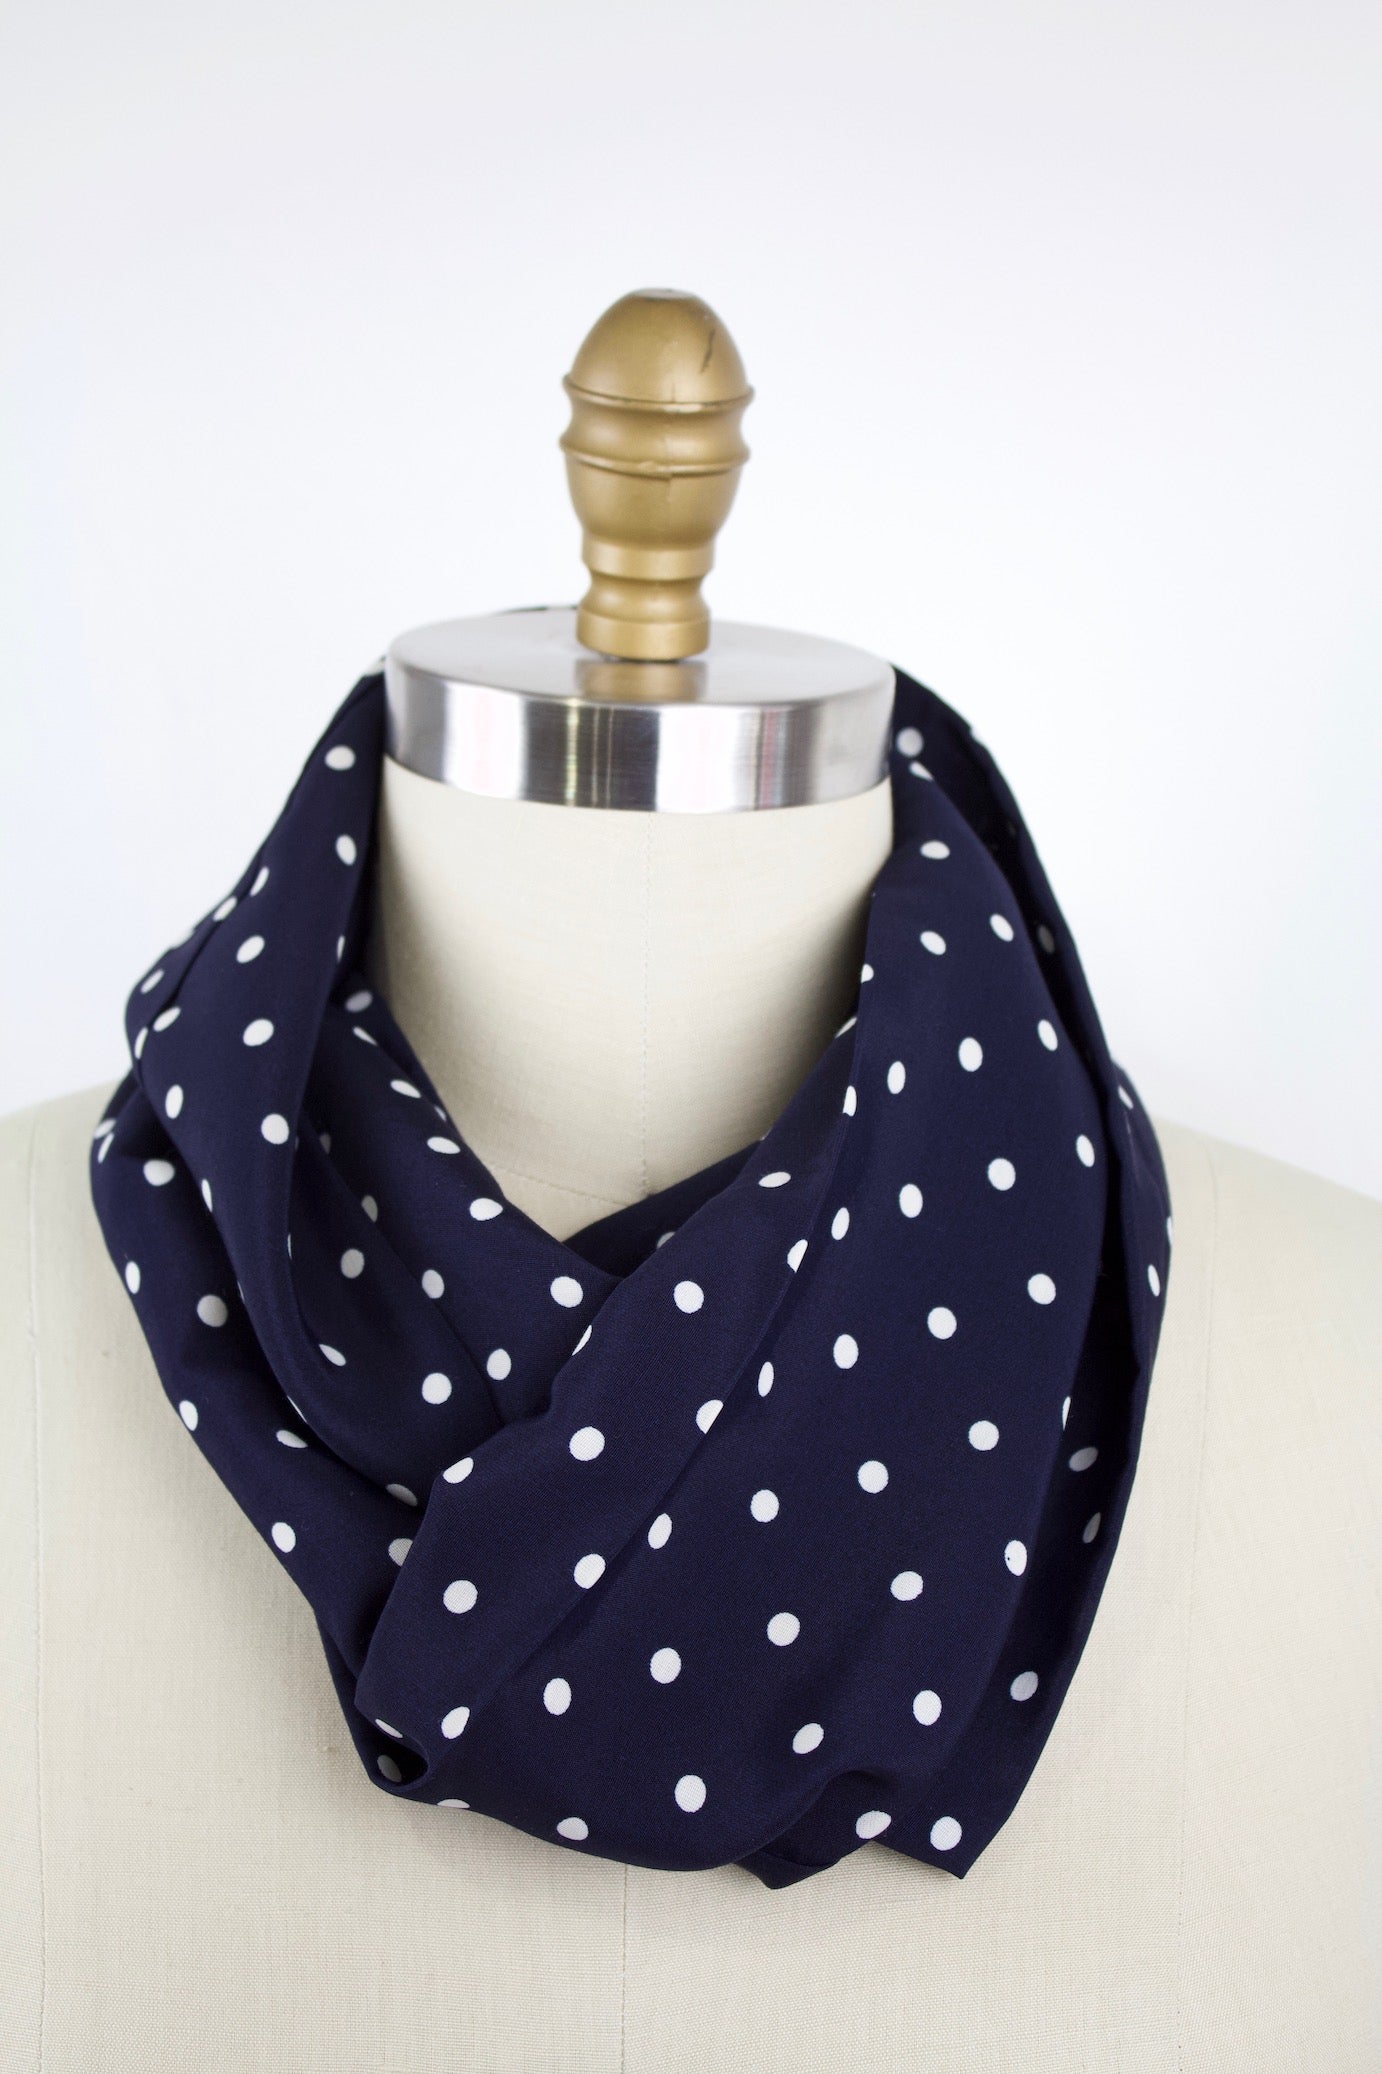 Polka Dot Infinity Scarf-The Blue Peony-Category_Infinity Scarf,Color_Blue,Department_Personal Accessory,Material_Polyester,Pattern_Polka Dot